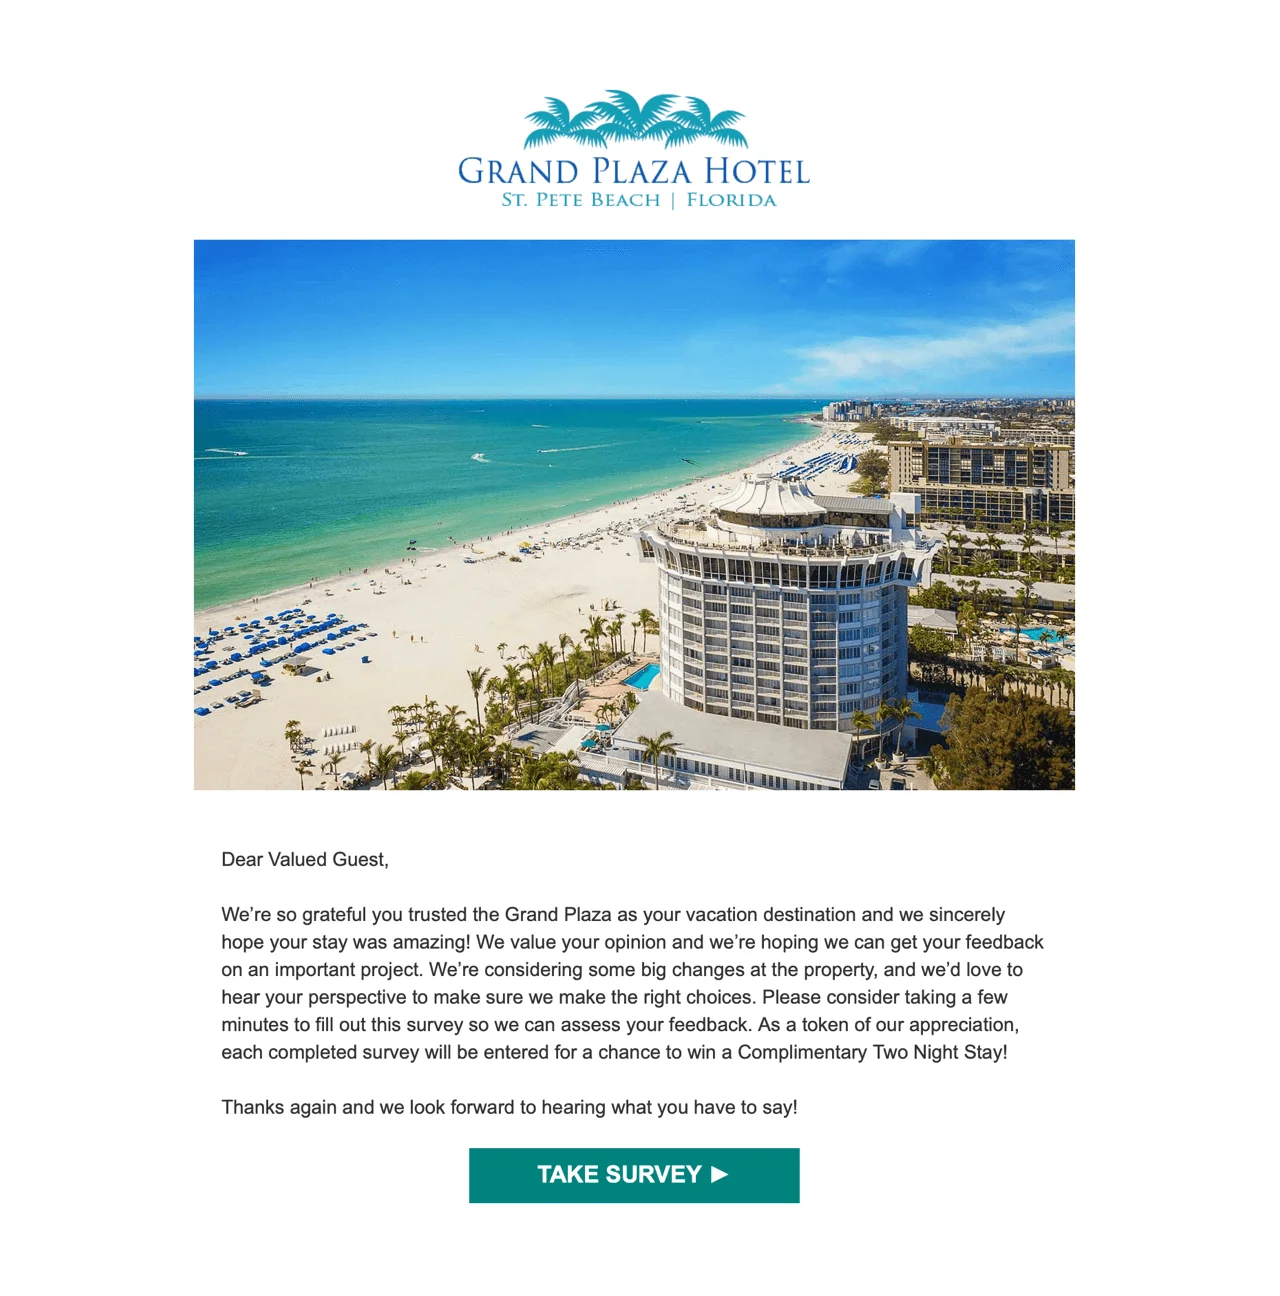 A Grand Plaza Hotel email with a survey embedded